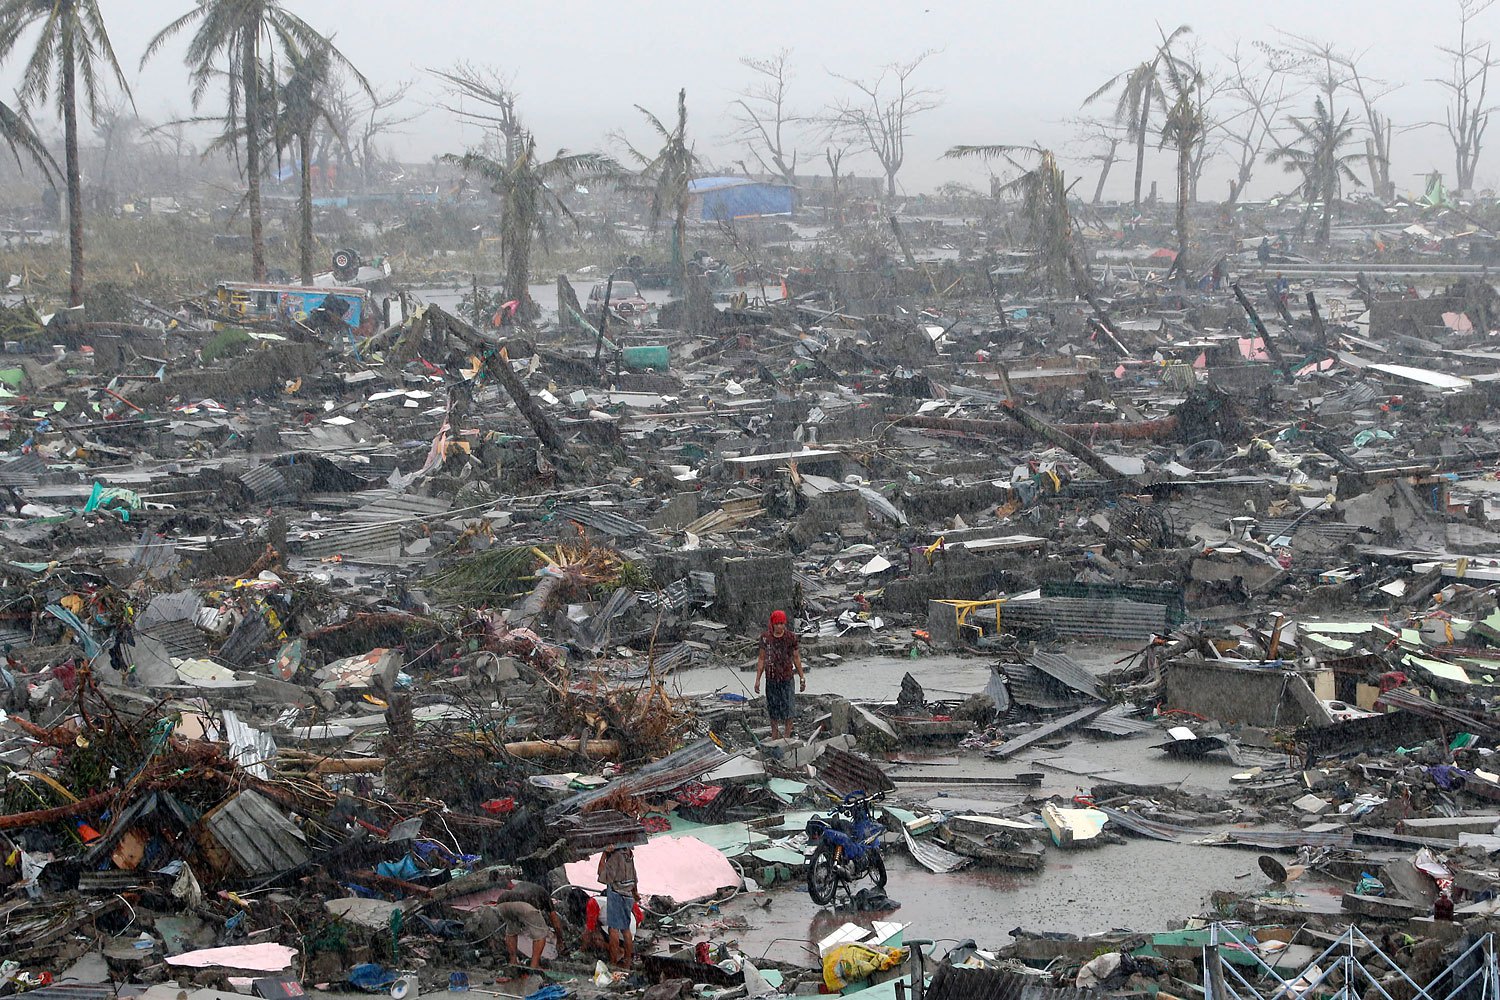 Survivors stand among debris and ruins of houses on Nov. 10, 2013, after Supertyphoon Haiyan battered the city of Tacloban, in central Philippines